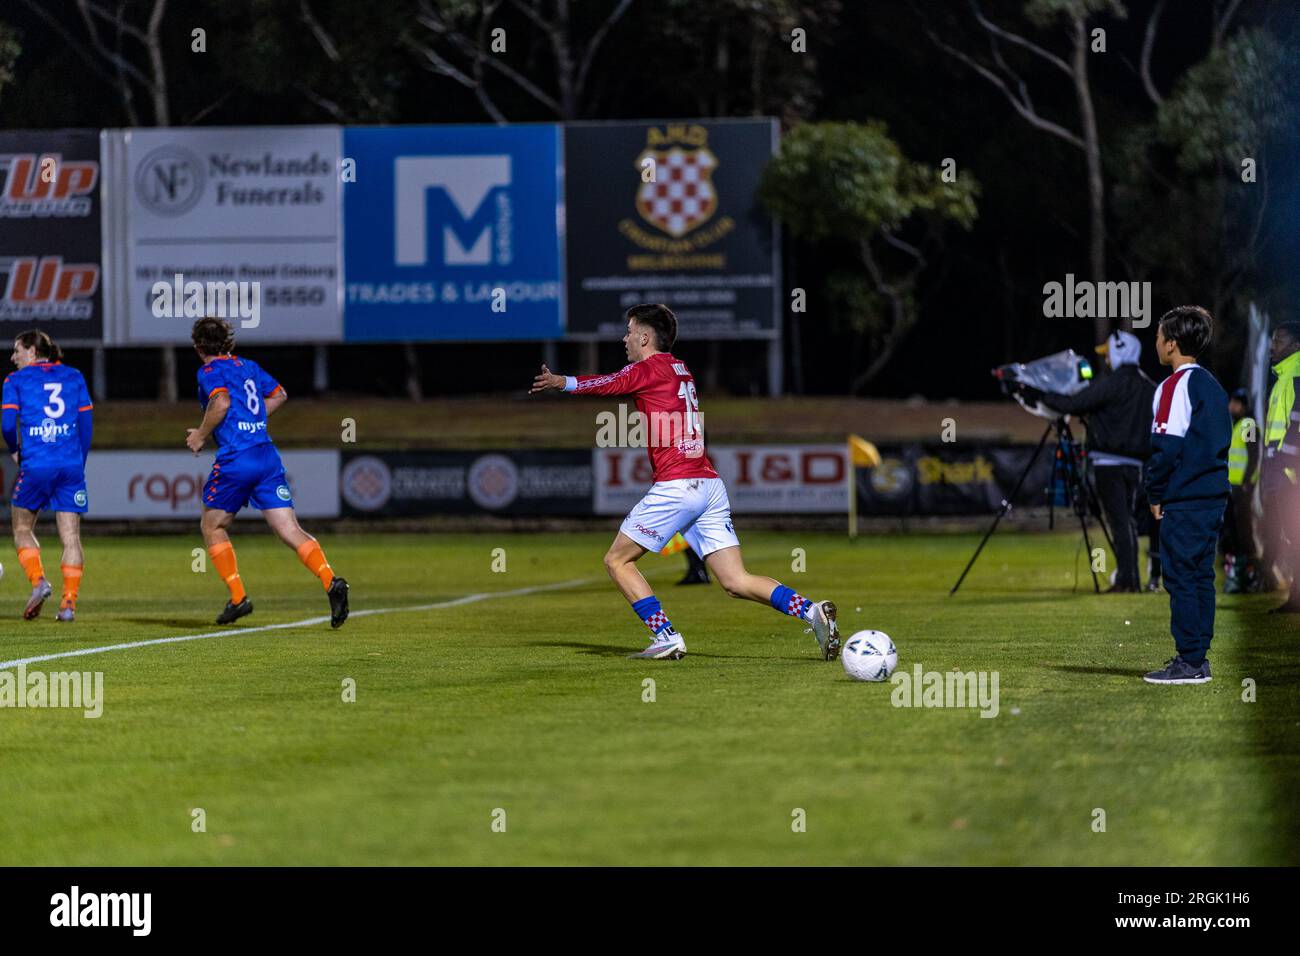 10 August,2023. Melbourne Knights Football Club, Victoria, Australia. Melbourne Knights vs Lions FC during the Australia Cup Round of 32 at Melbourne Knights Football Club, Sunshine North. Stock Photo